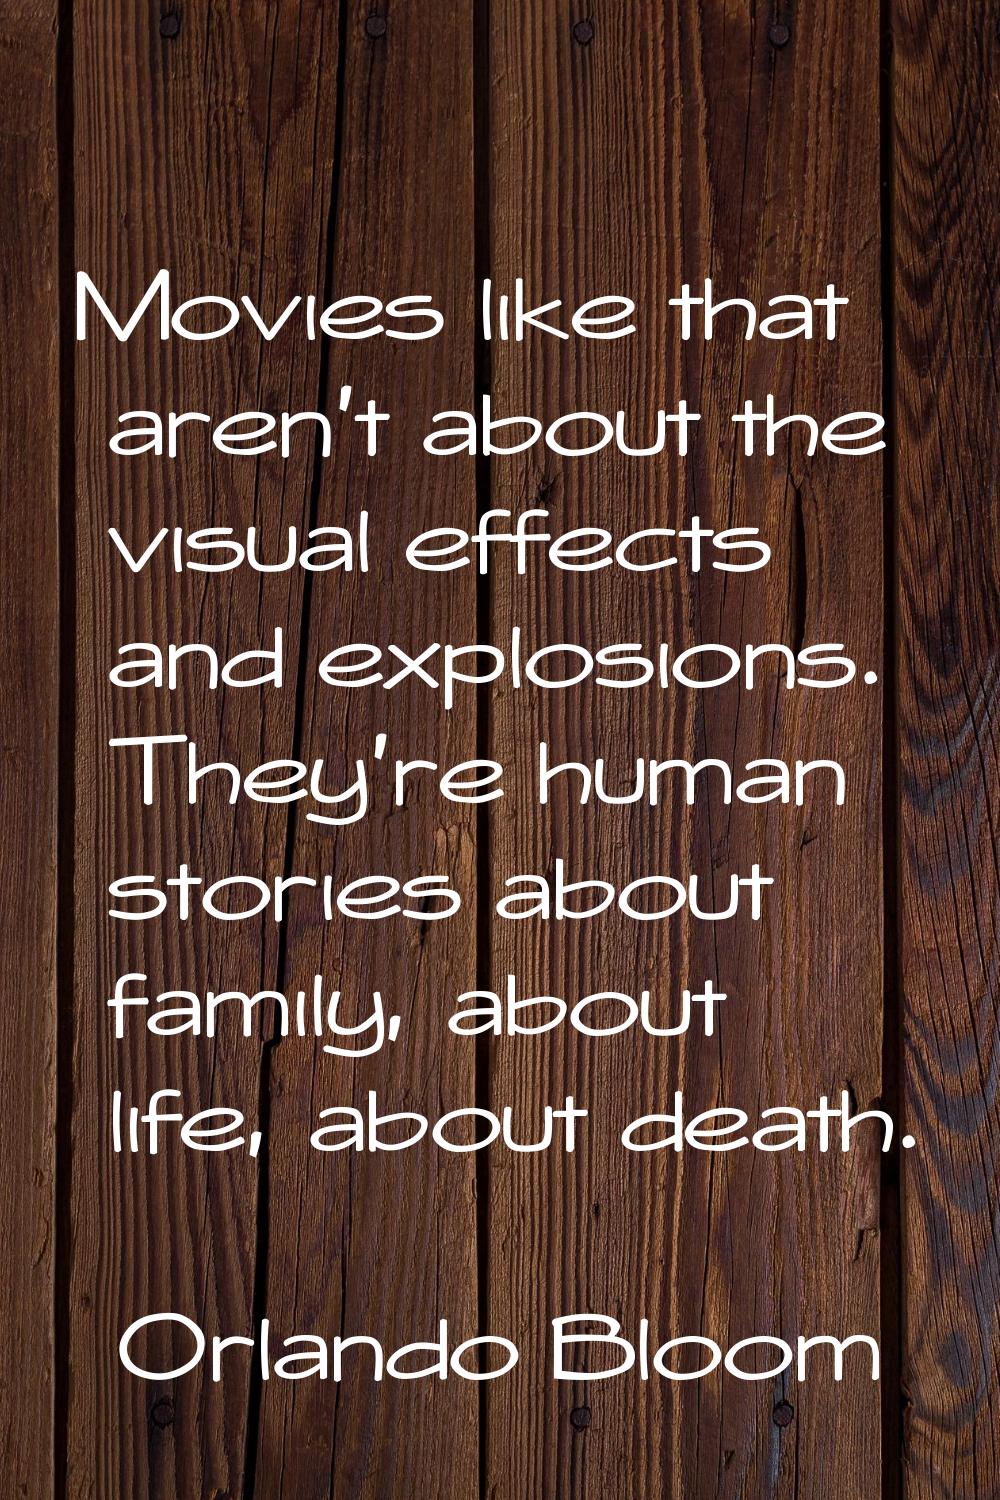 Movies like that aren't about the visual effects and explosions. They're human stories about family